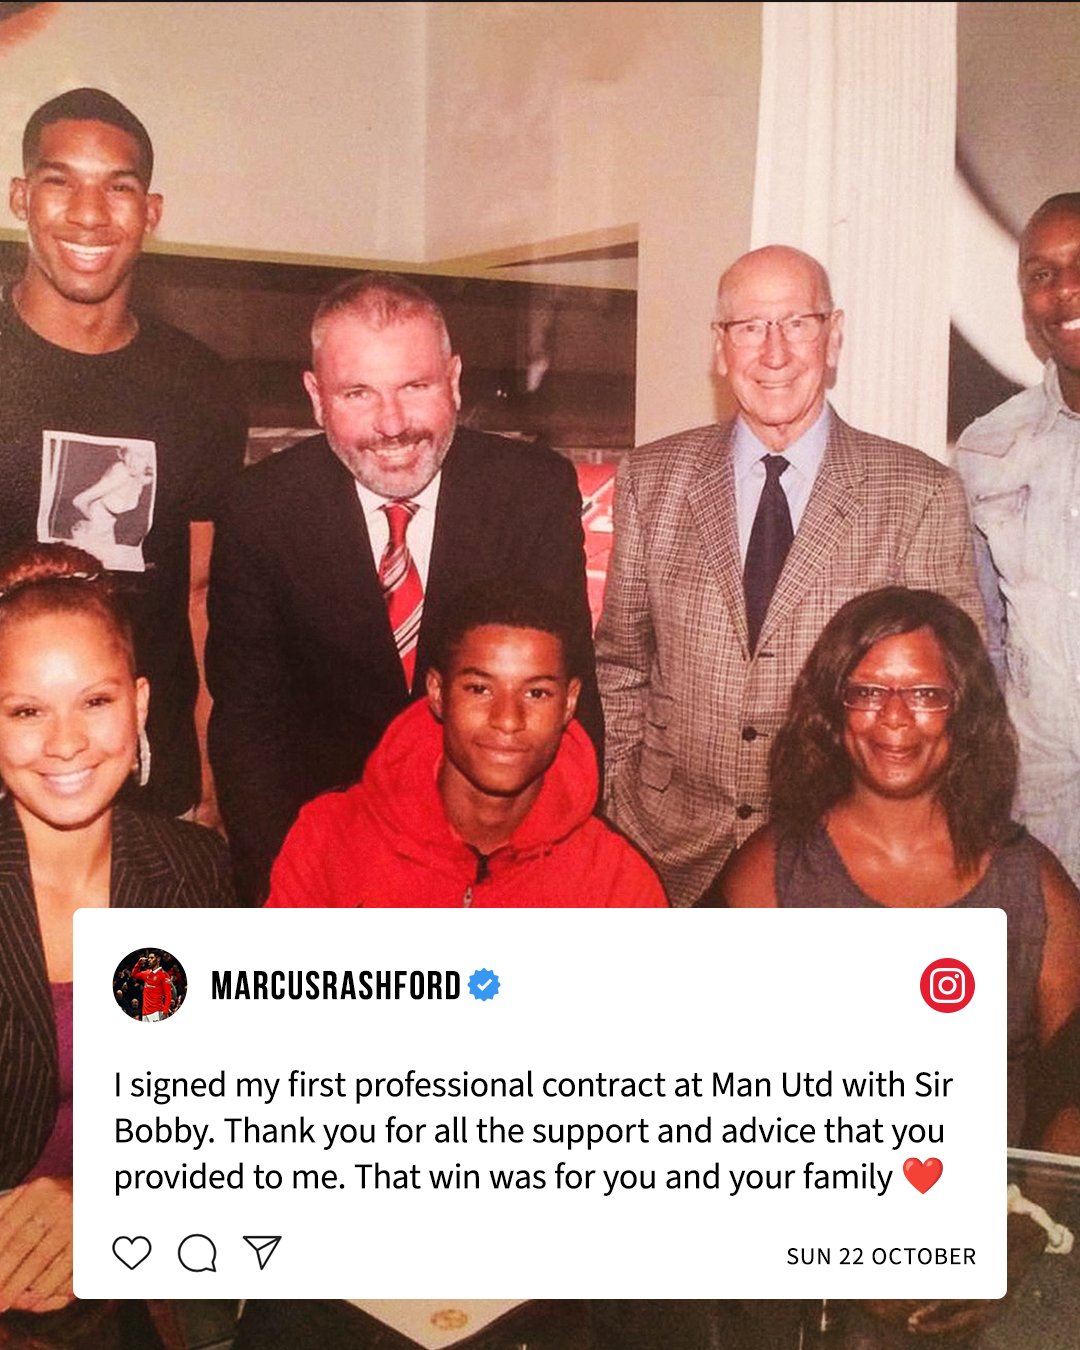 Marcus Rashford posts on his Instagram: "I signed my first professional contract at Man Utd with Sir Bobby. Thank you for all the support and advice that you provided to me. That win was for you and your family ️."